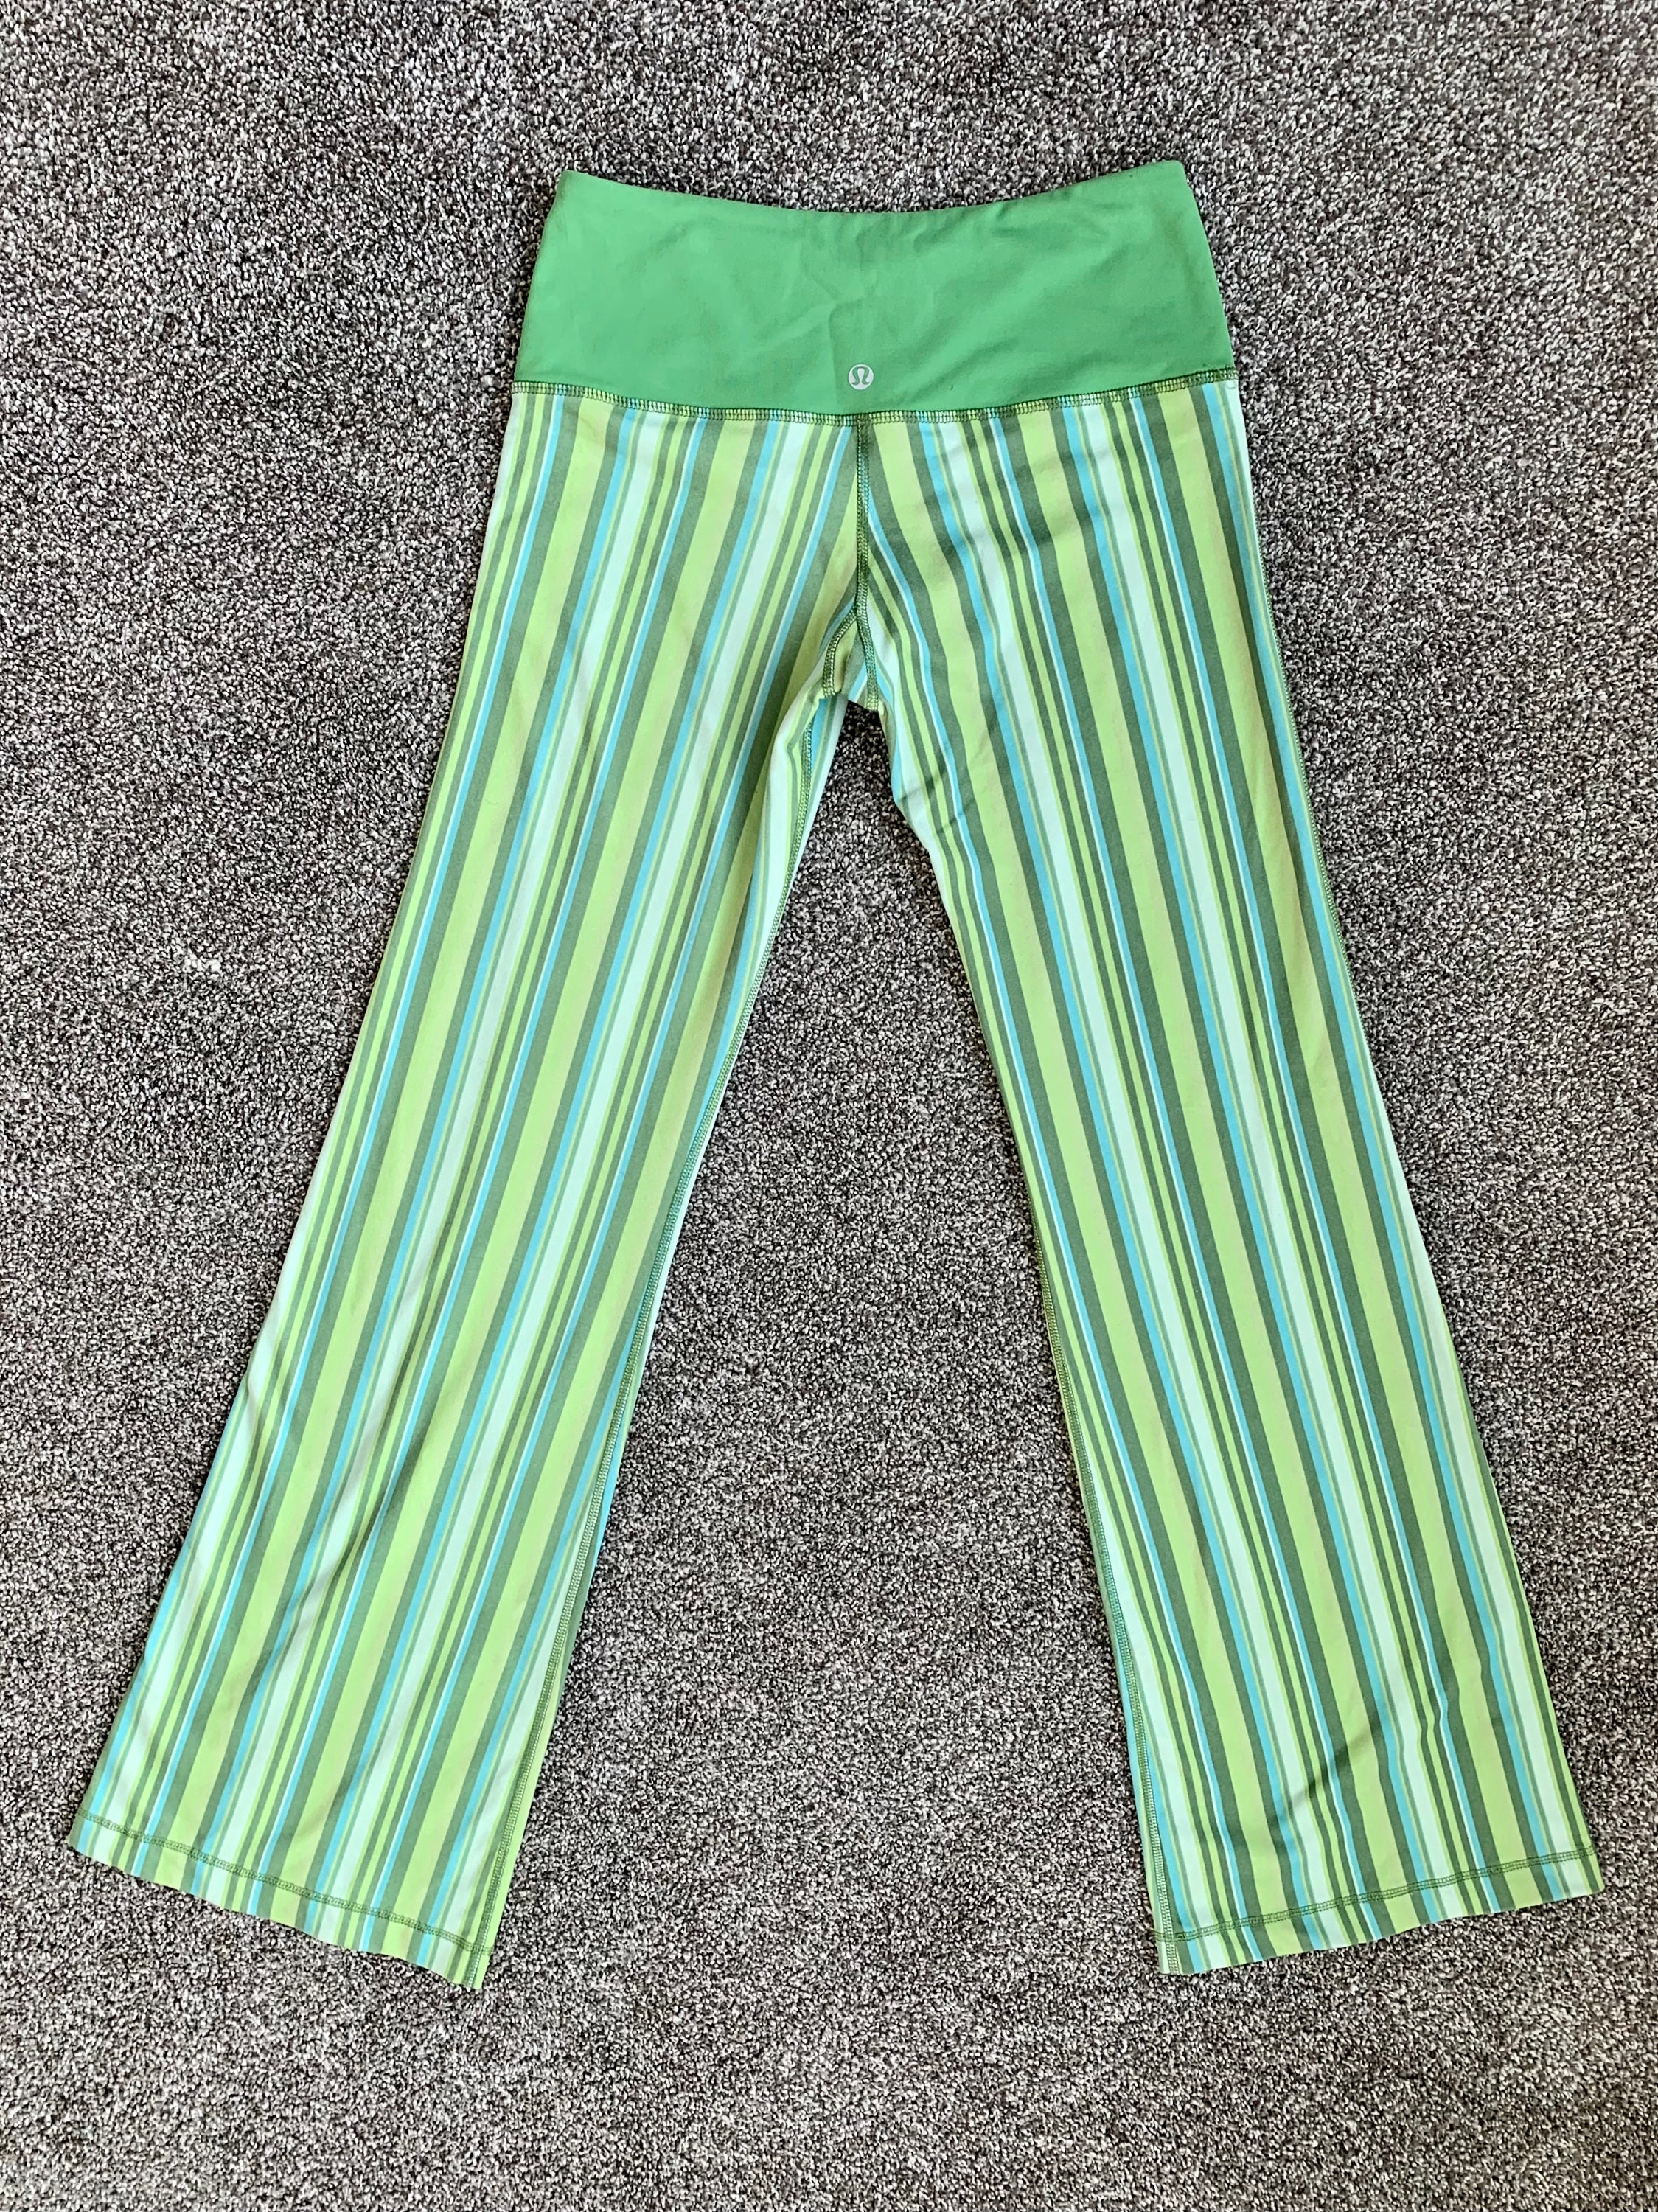 LULULEMON Size 4 Tall Vintage Green Stripe Wide Leg Bell Bottom Flare Yoga  Pants GROOVY Excellent Perfect Condition Rare Find FREE Shipping -   Canada